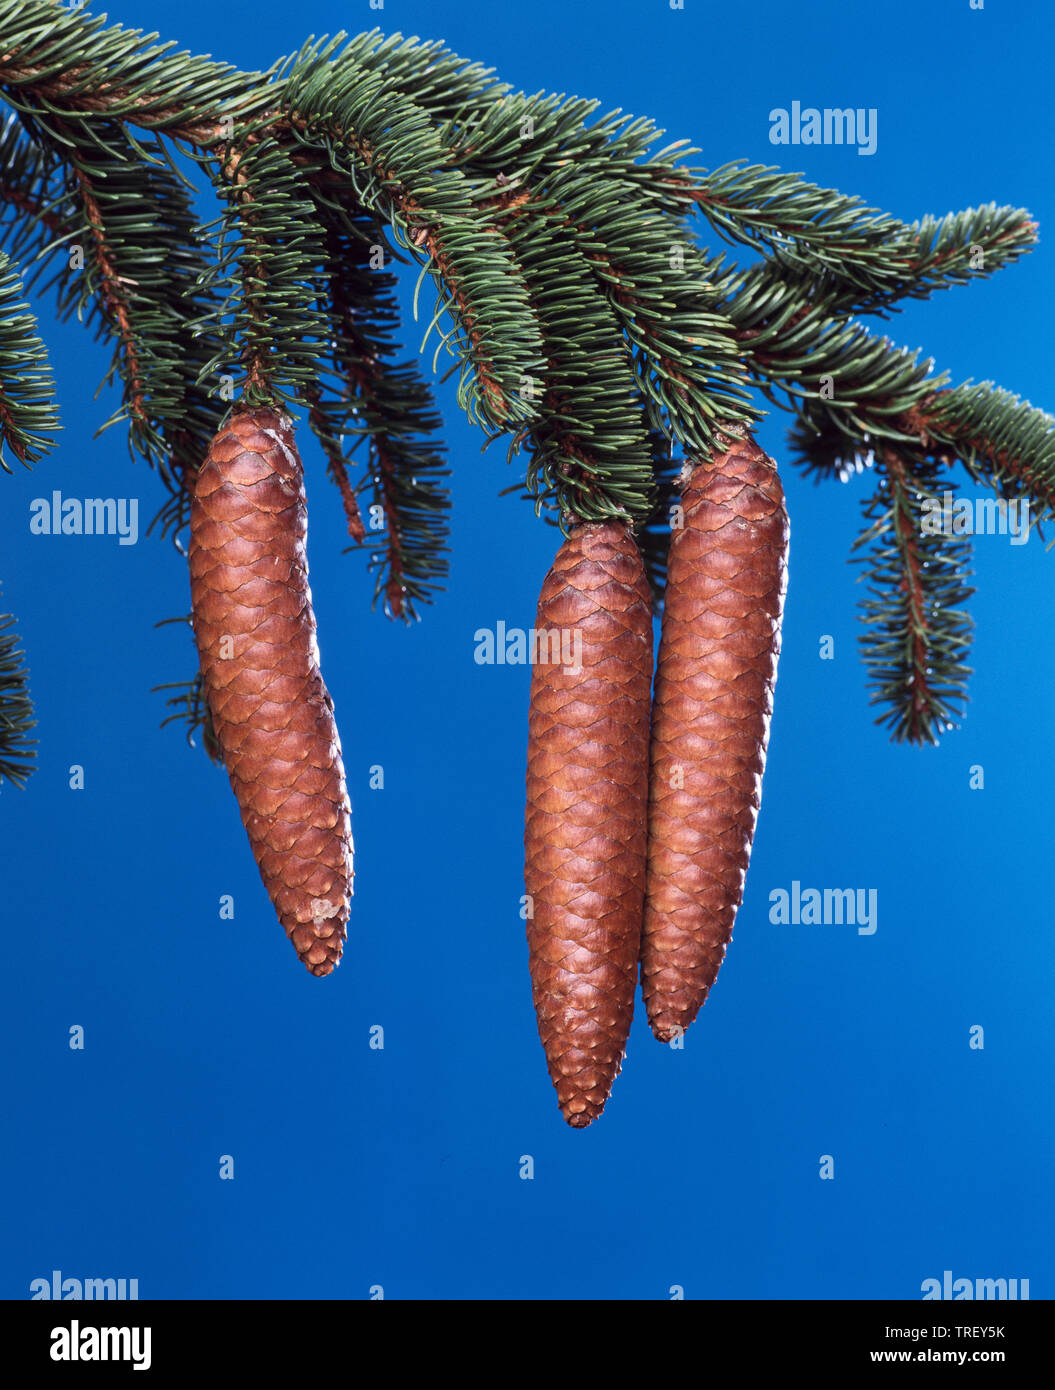 Common Spruce, Norway Spruce (Picea abies). Cones on a twig. Studio picture against a blue background. Stock Photo